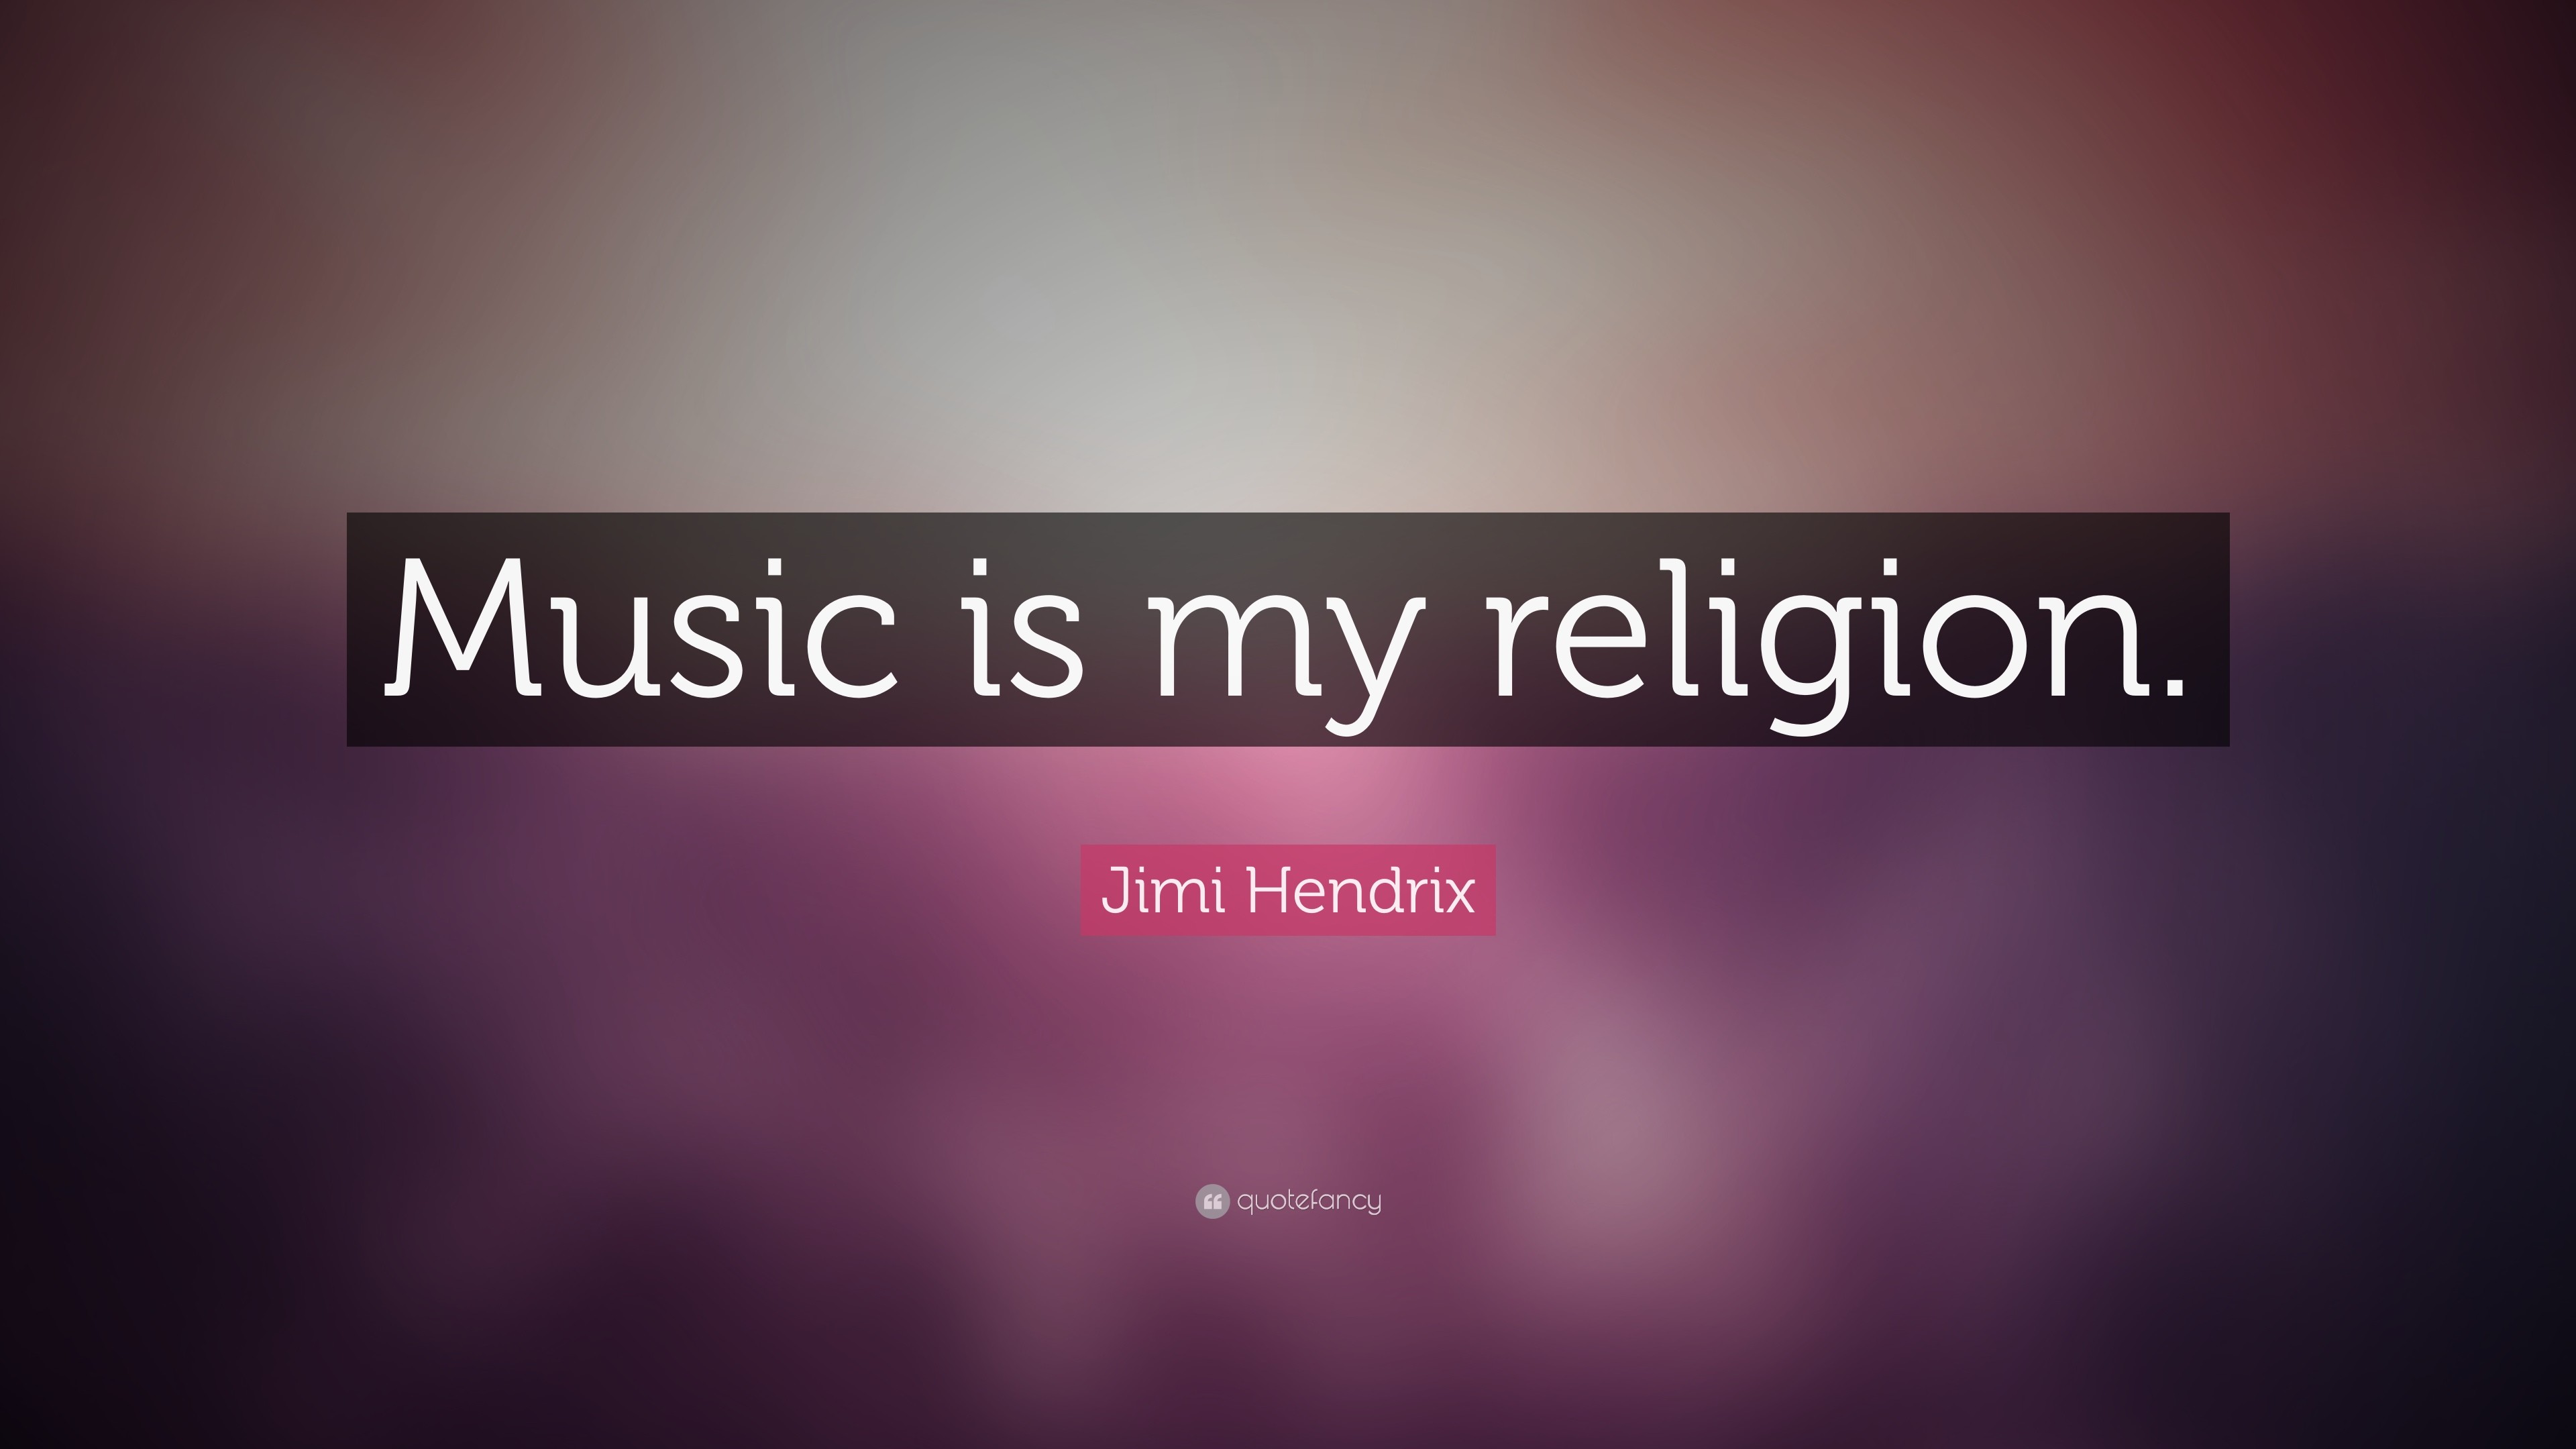 3840x2160 Piano Wallpaper - Wallpapers Browse Awesome & Funny Desktop wallpapers  quotes, ...